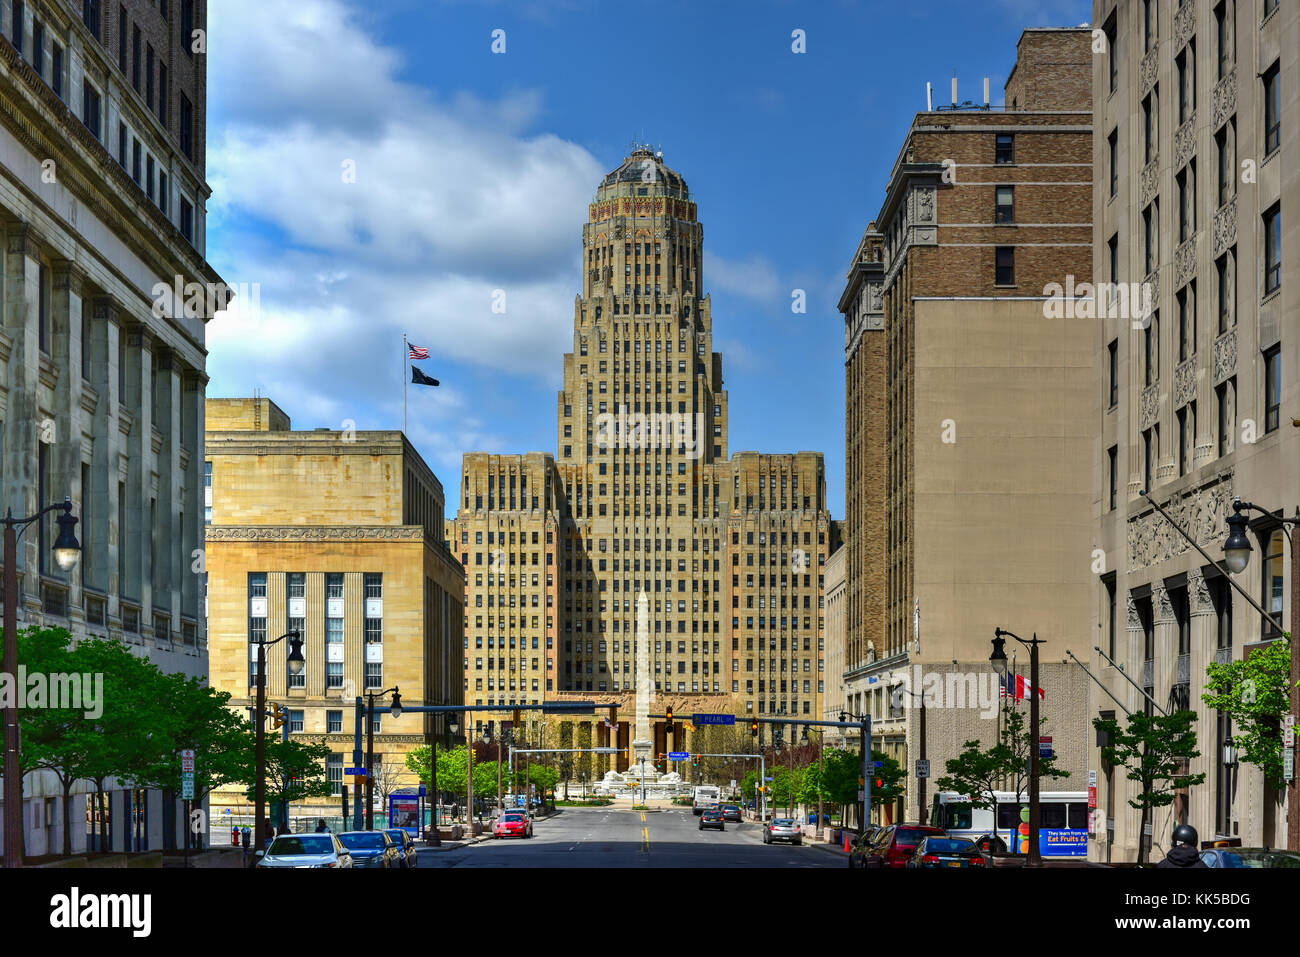 Buffalo City Hall, the seat for municipal government in the City of Buffalo, New York. Located at 65 Niagara Square, the 32 story Art Deco building wa Stock Photo